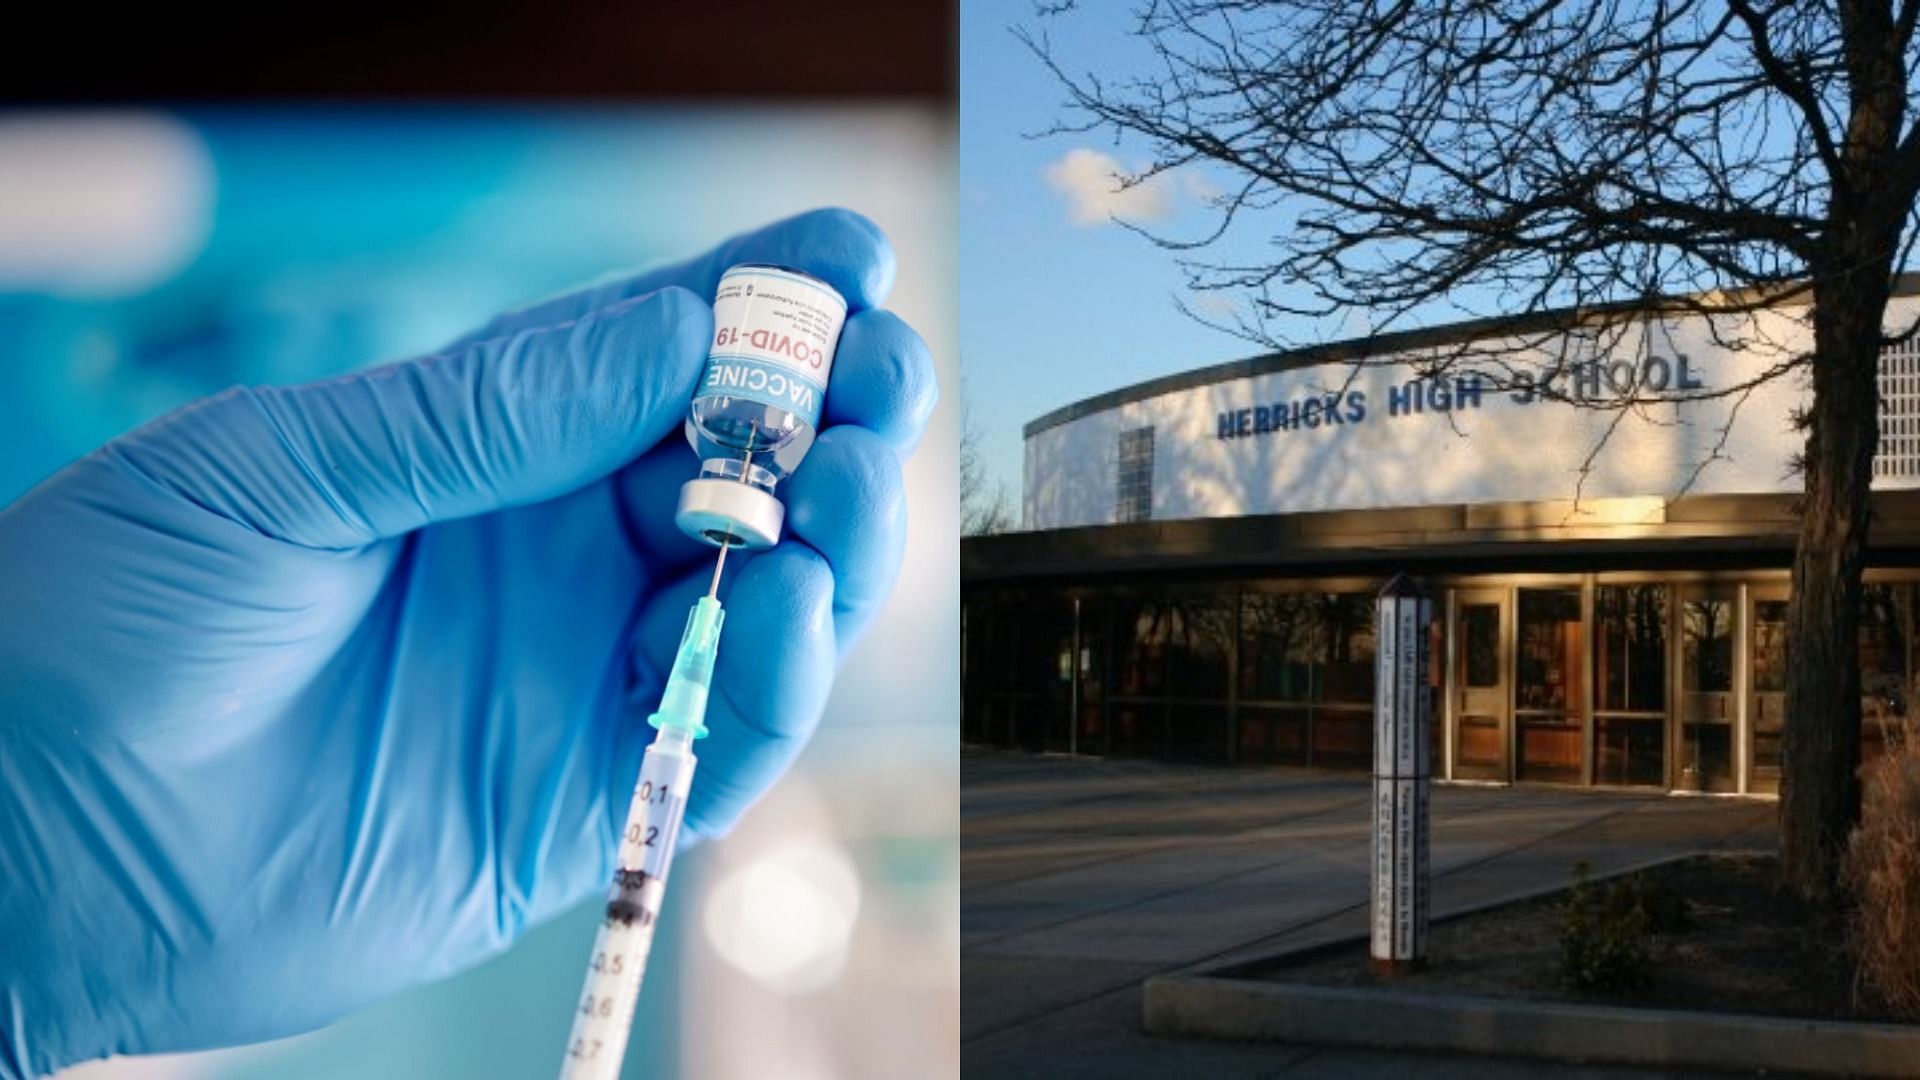 Herricks High School teacher Laura Russo arrested for administering J&amp;J COVID vaccine to a minor (Image via Getty Images and Herricks High School/Facebook)